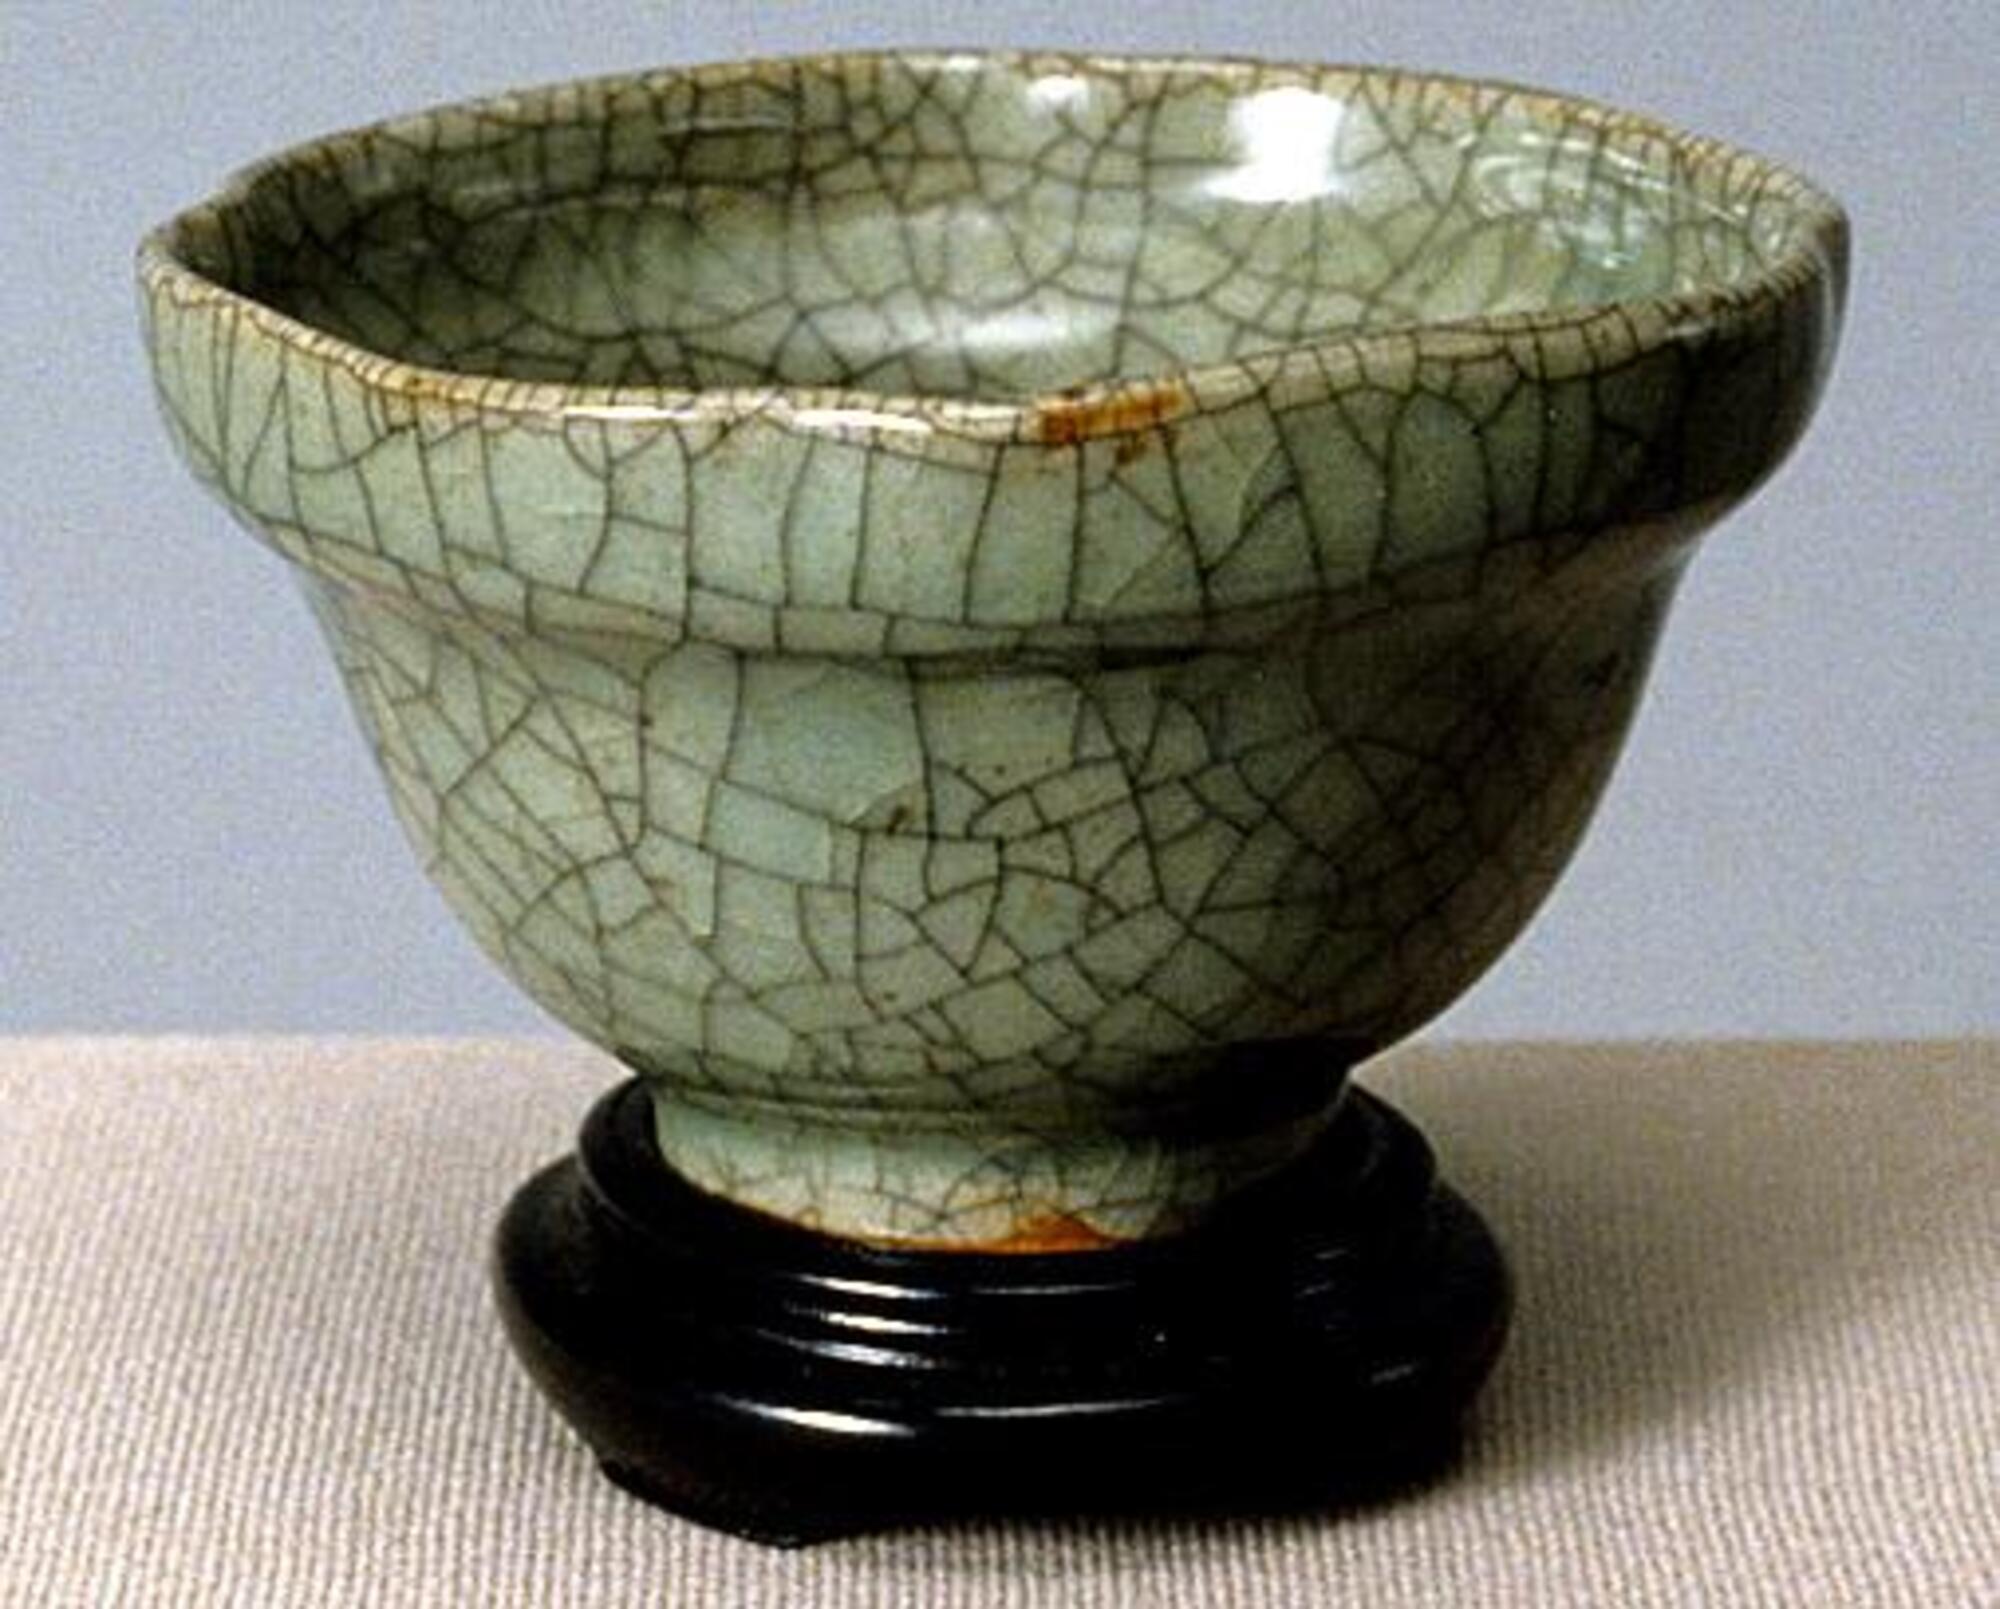 A stoneware, bowl-shaped cup on a tall foot ring with an articulated five-lobed rim. It is covered in a crackled celadon glaze. 